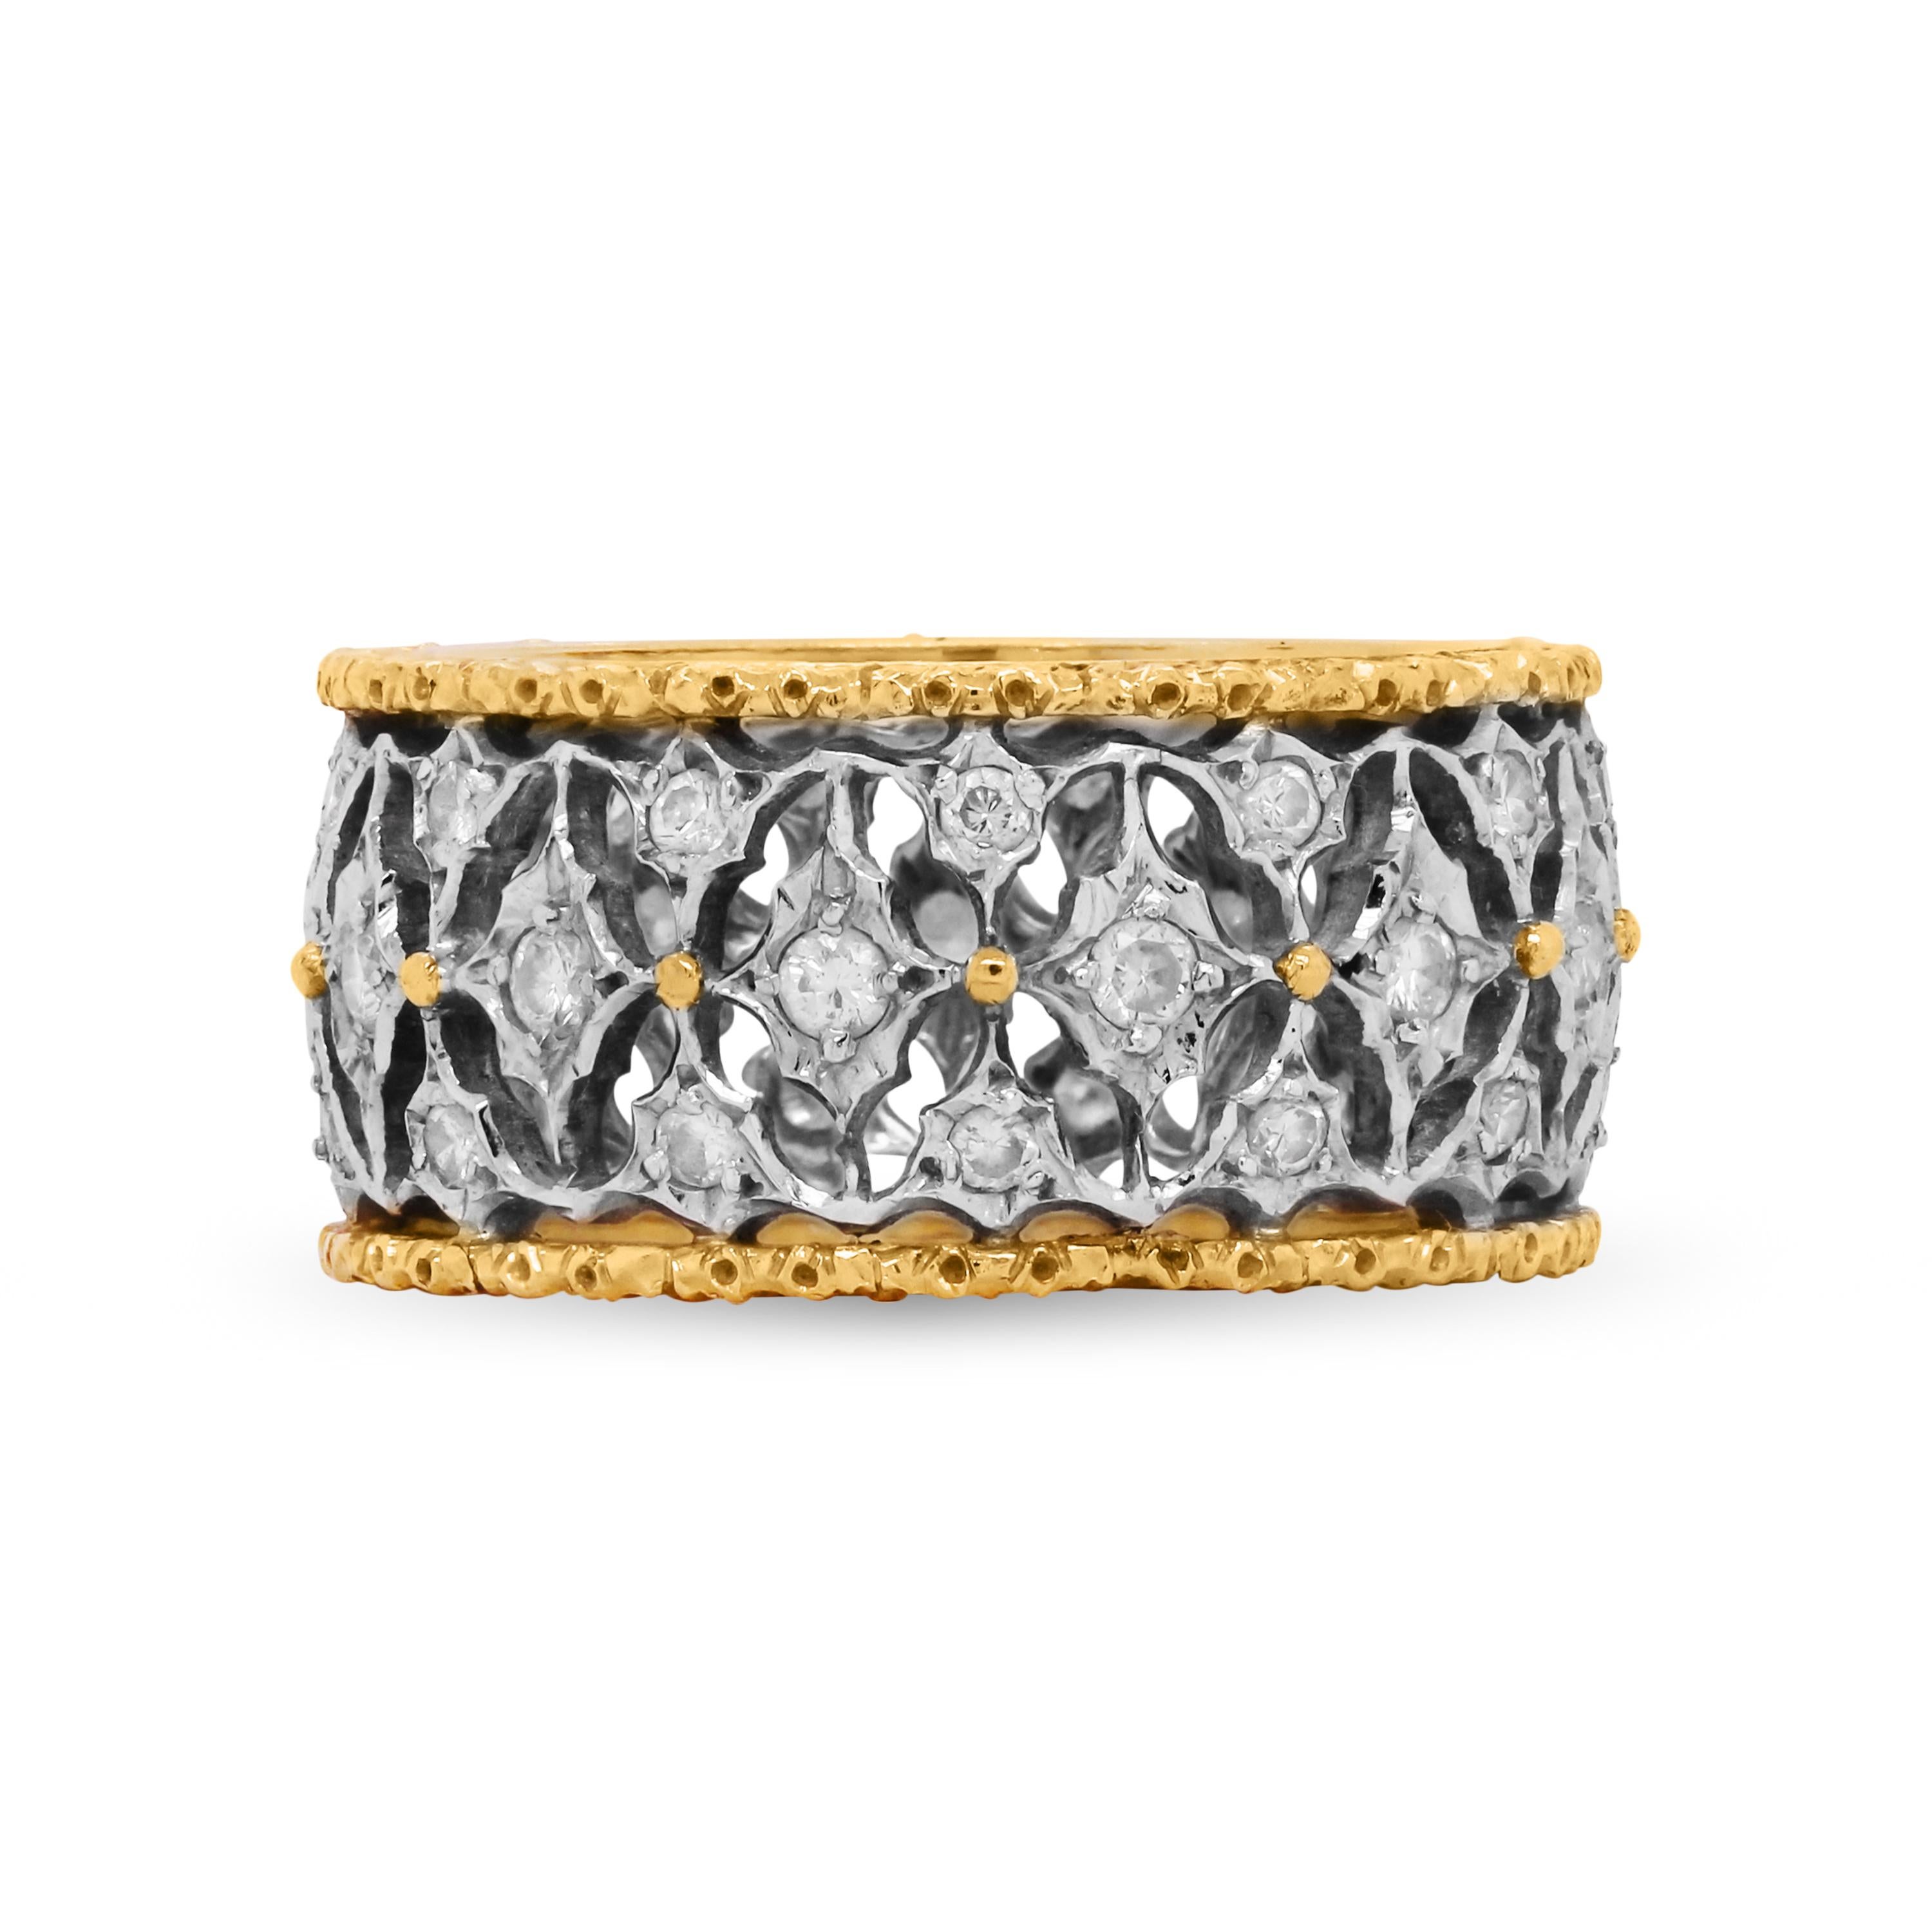 Buccellati 18 Karat Yellow White Two-Tone Gold Diamond Band Ring

Diamonds are set in 18 karat white gold with the edges of the band being in 18 karat yellow gold.

Size 6. Band is 10mm in width.

Signed Buccellati